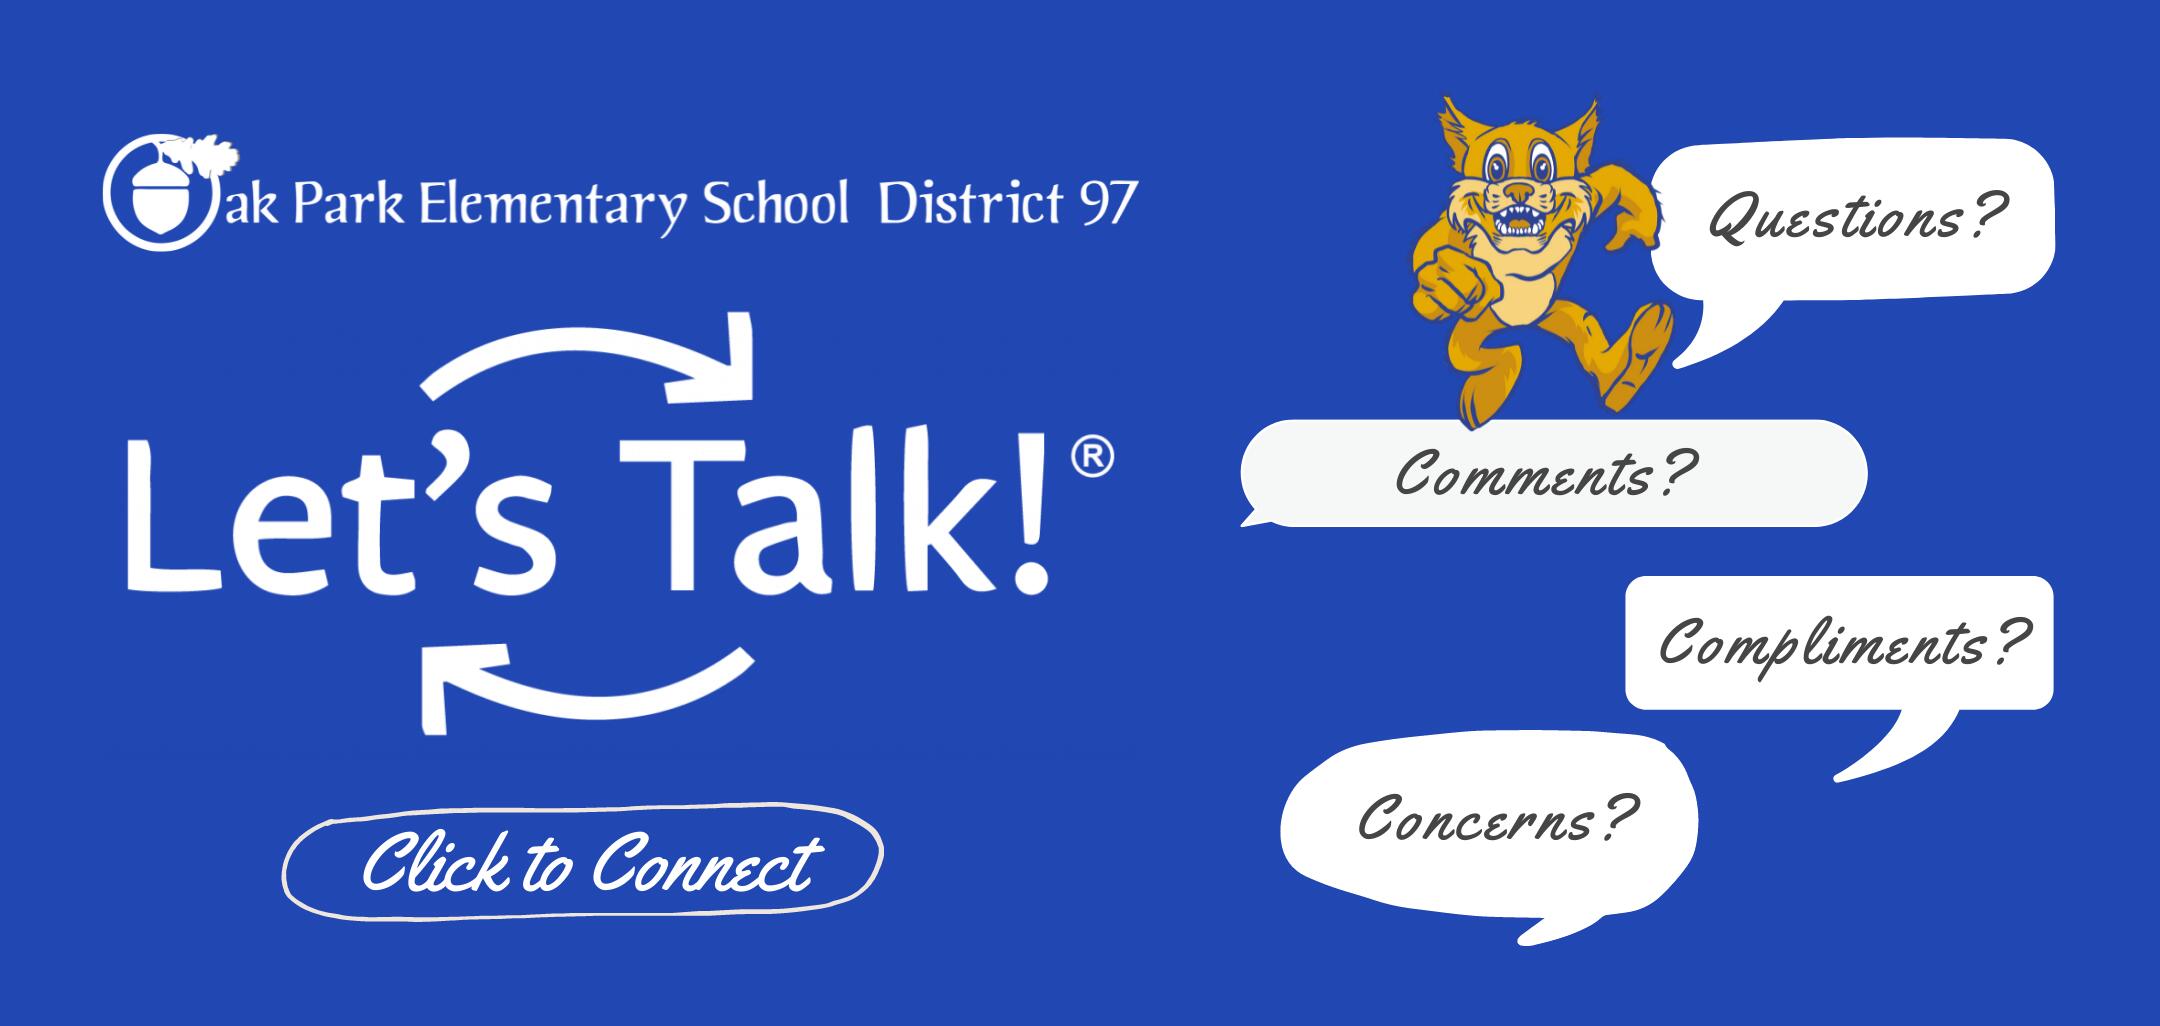 Click to share questions, concerns or compliments via Let's Talk >